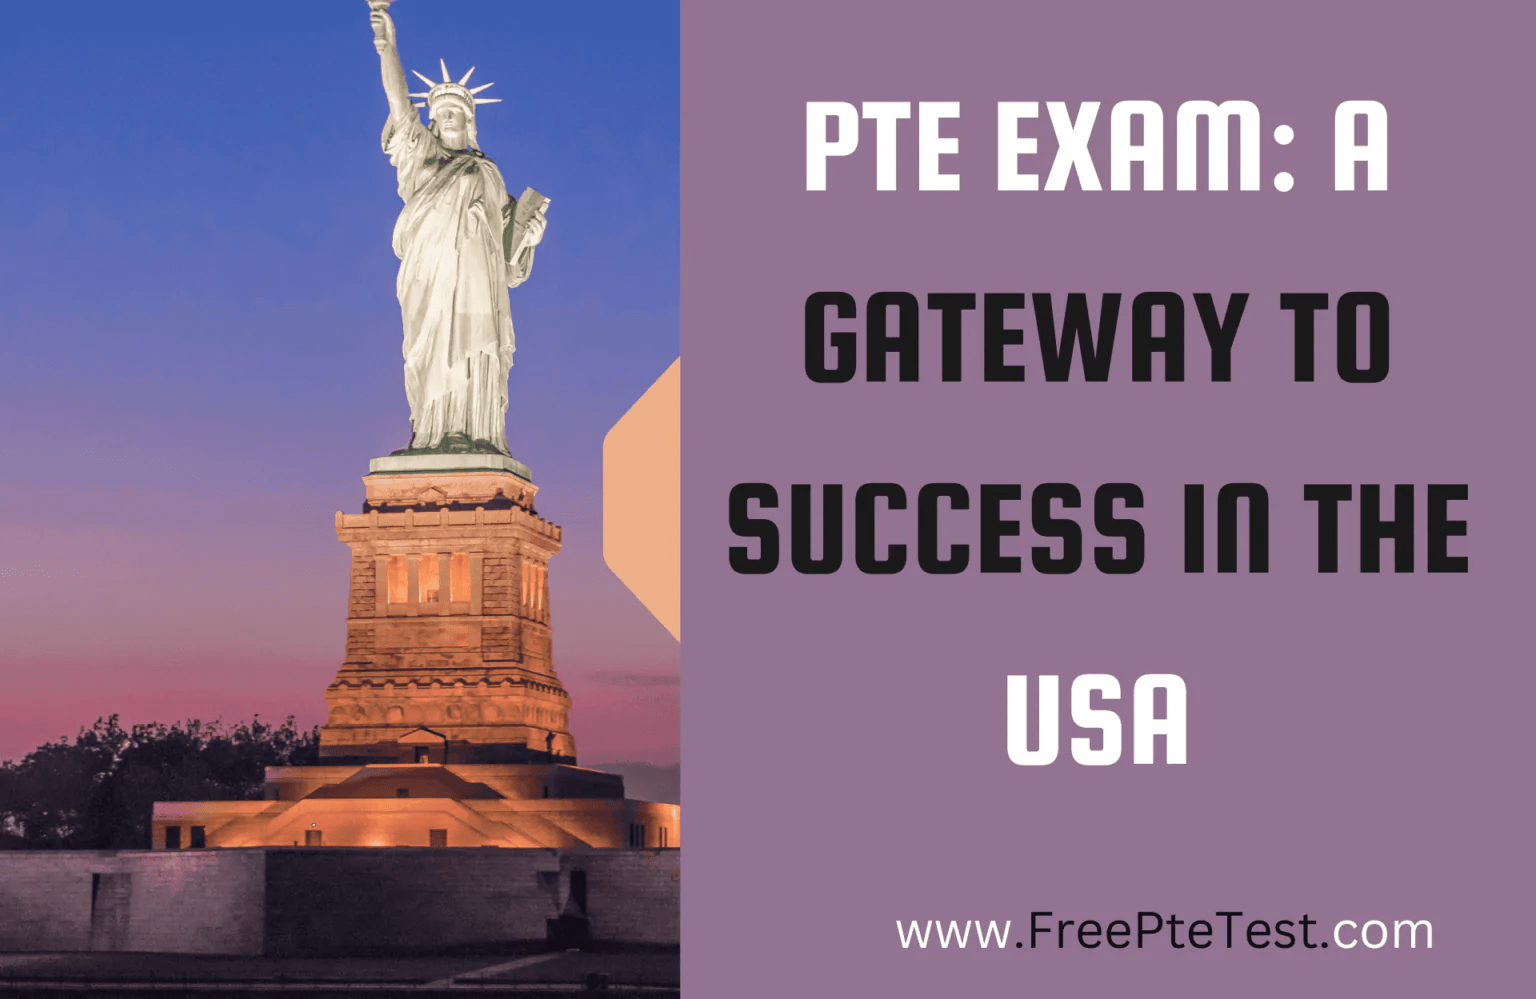 PTE Exam: A Gateway to Success in the USA